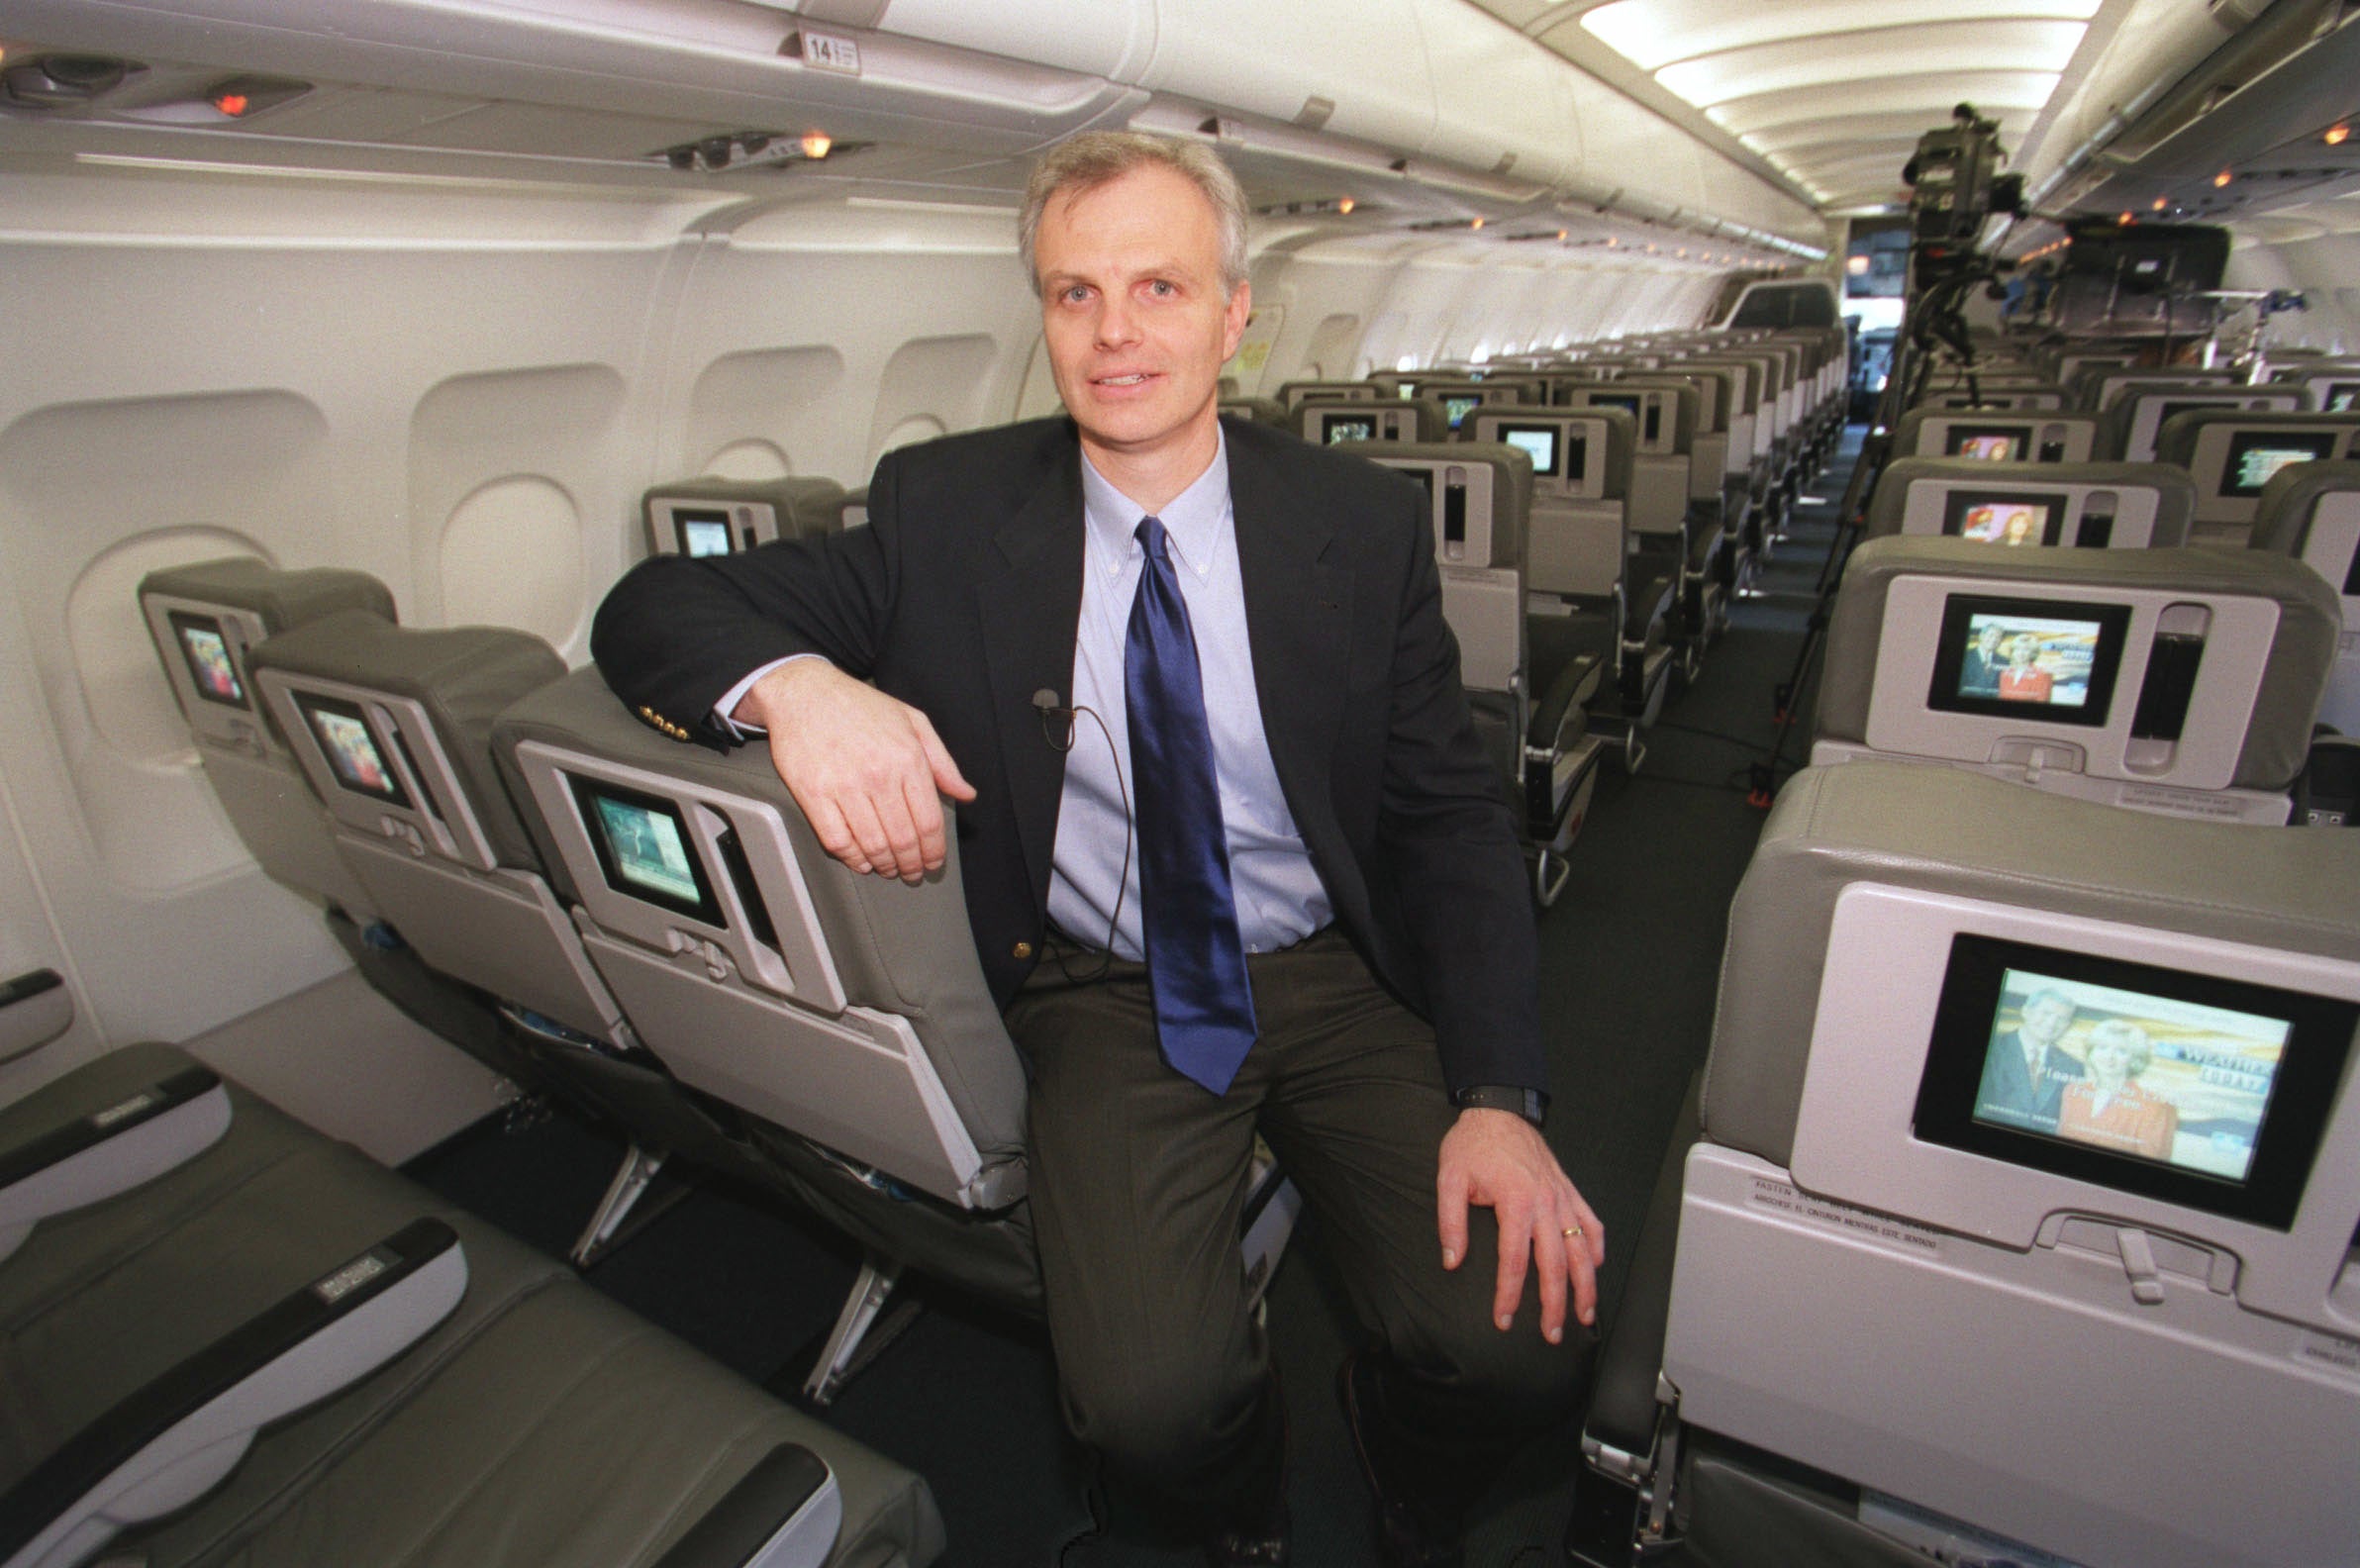 NY: DAVID NEELEMAN, CEO OF JET BLUE AIRLINES